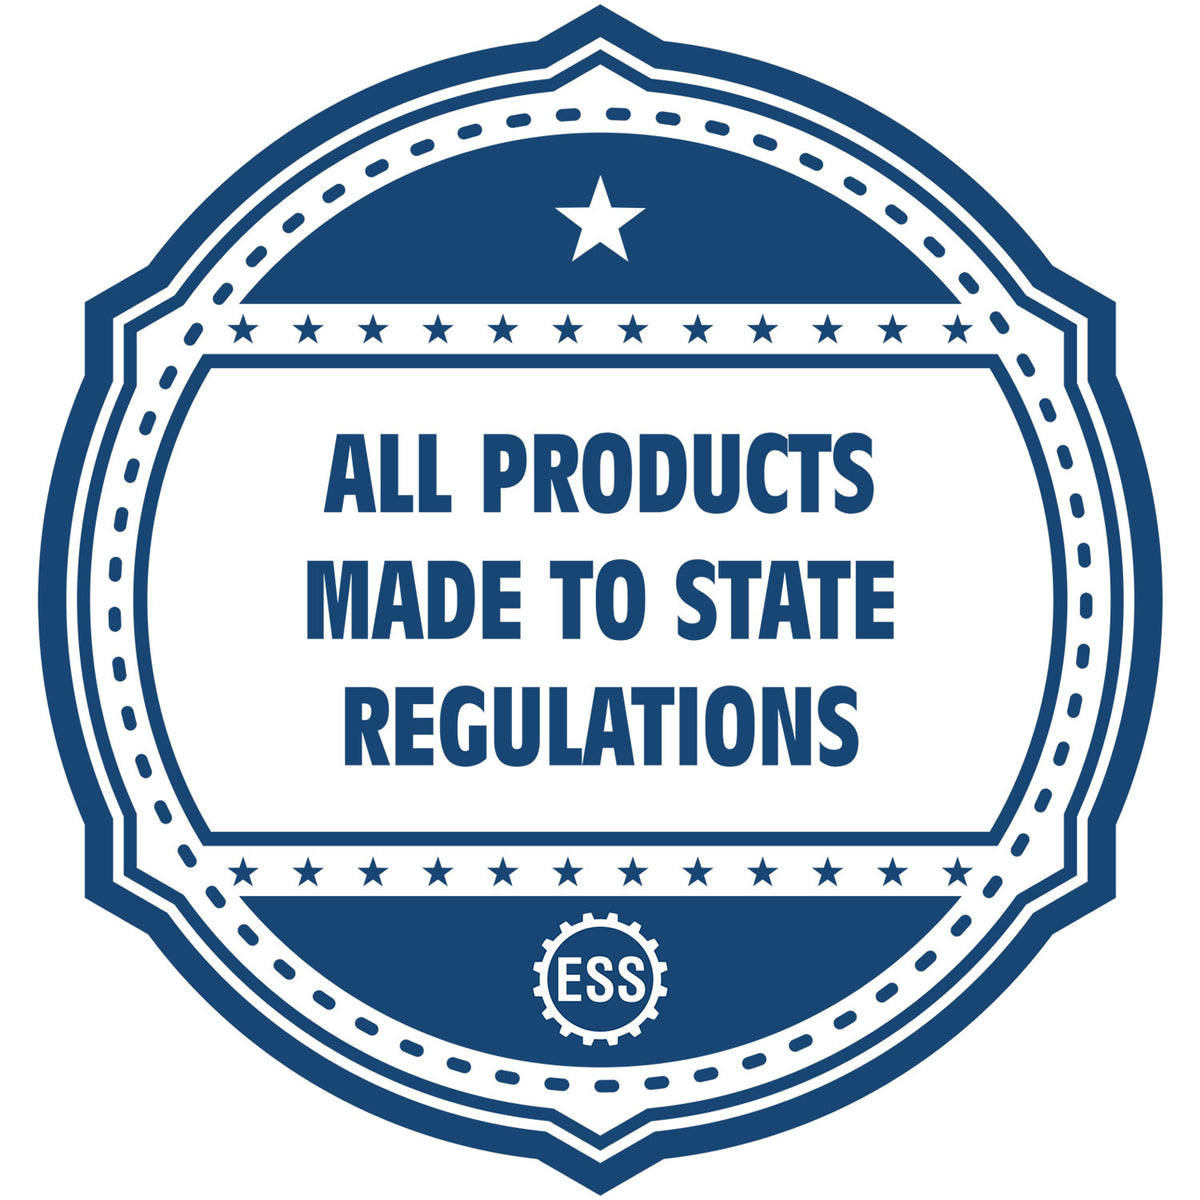 An icon or badge element for the Illinois Professional Engineer Seal Stamp showing that this product is made in compliance with state regulations.